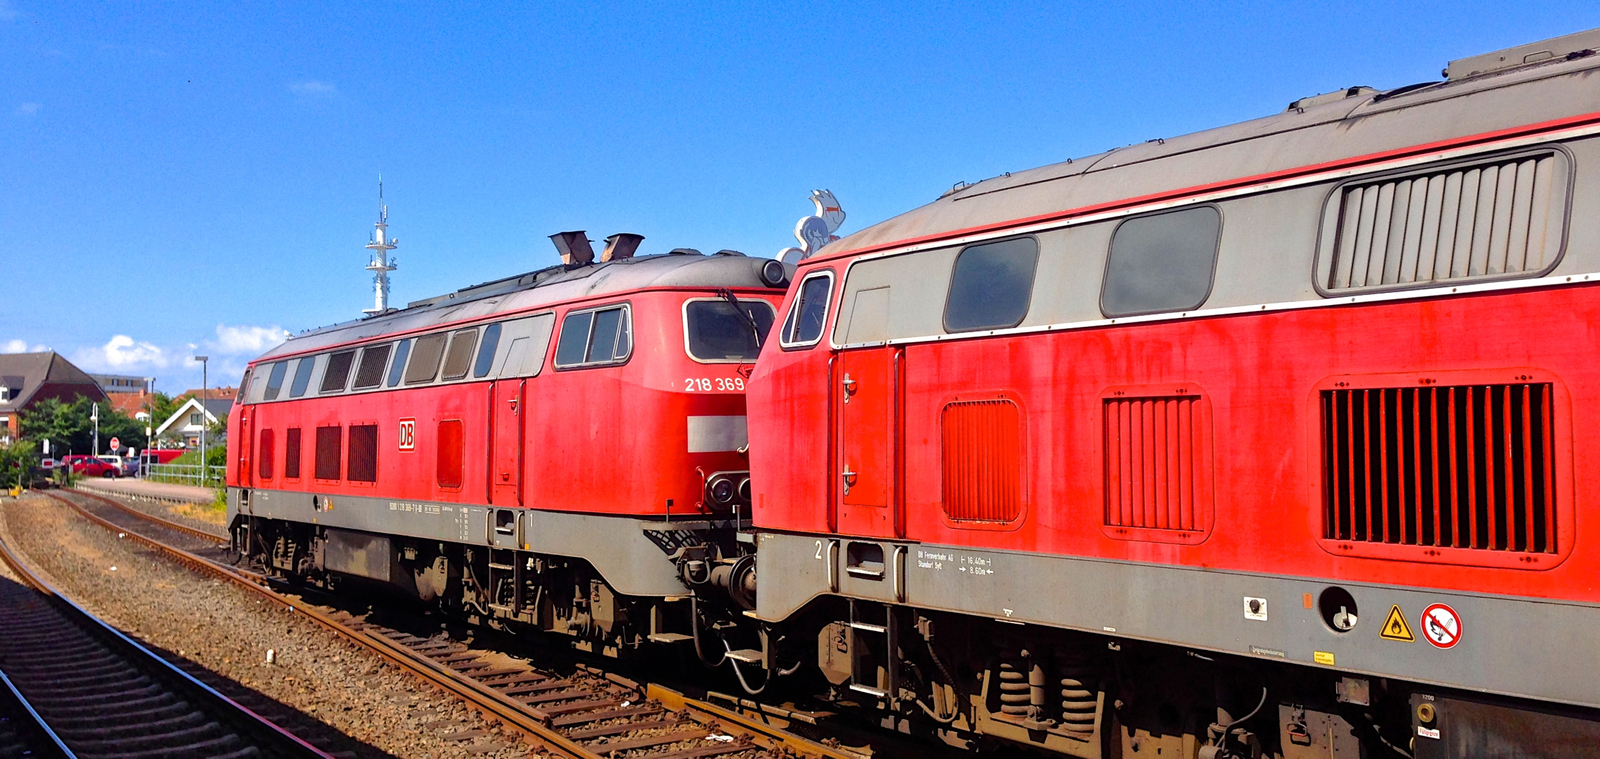 Two traffic red 218s in June 2014 in front of the Sylt shuttle